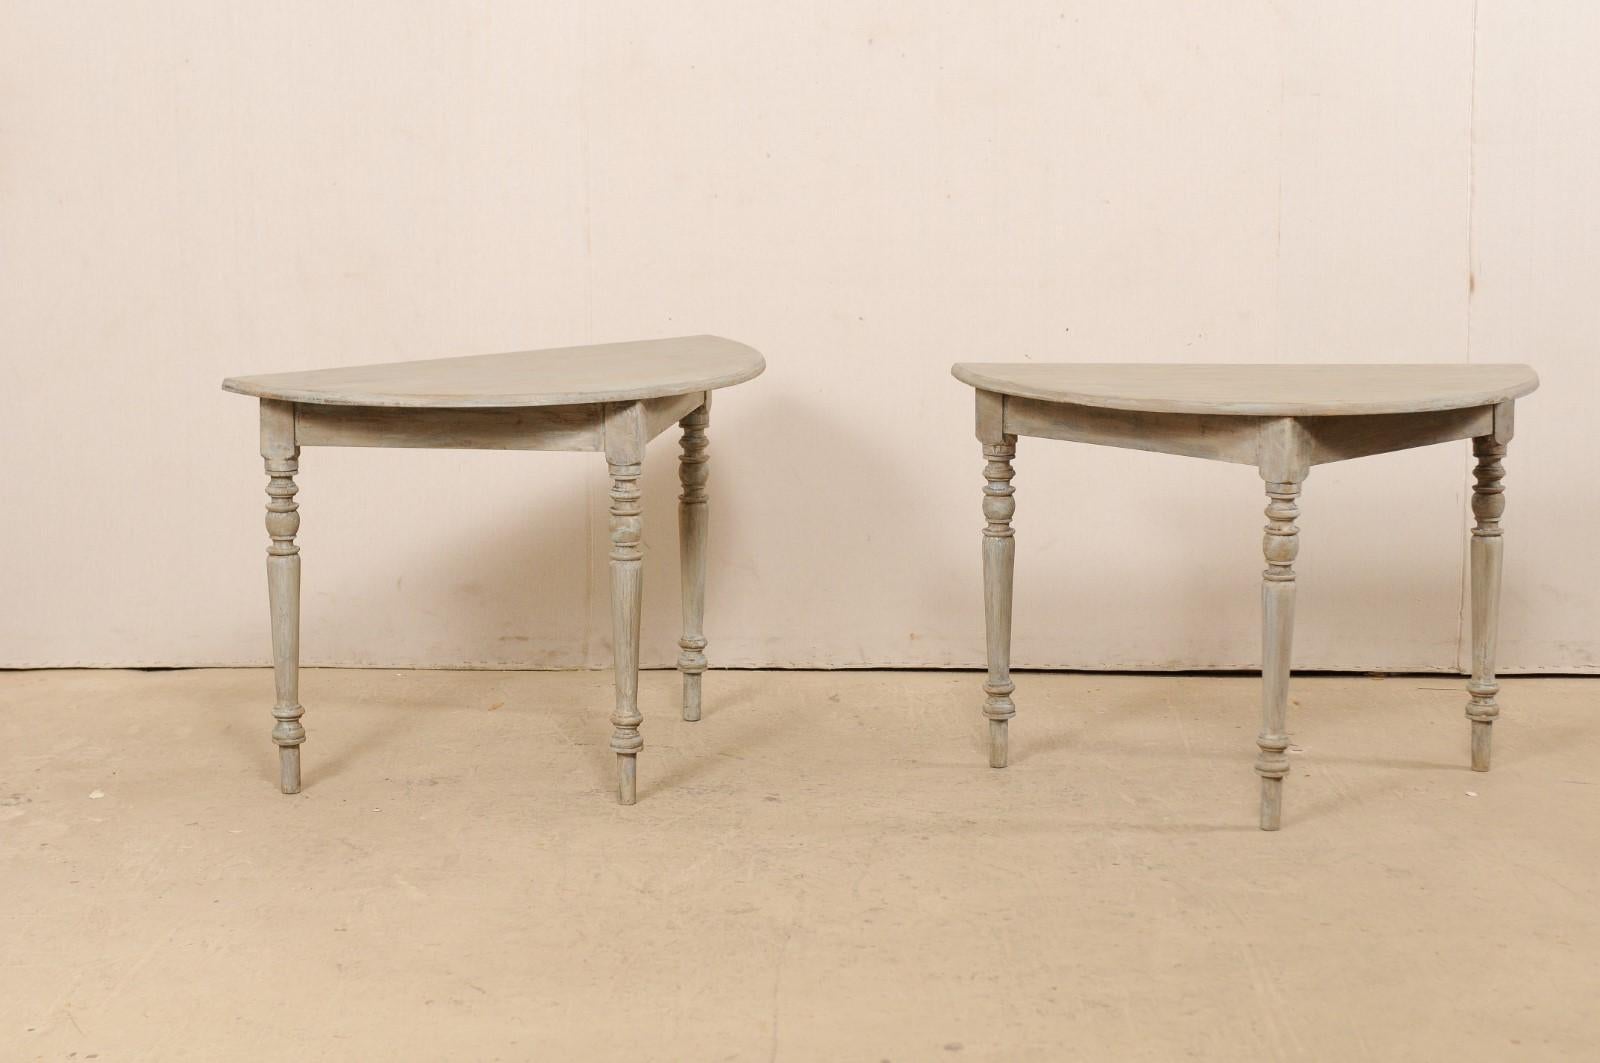 A pair of 19th century Swedish painted wood demilune tables. This pair of antique demilune tables from Sweden each features half moon tops over clean, triangular-shaped aprons, which are raised on three rounded legs with turned carvings accentuating